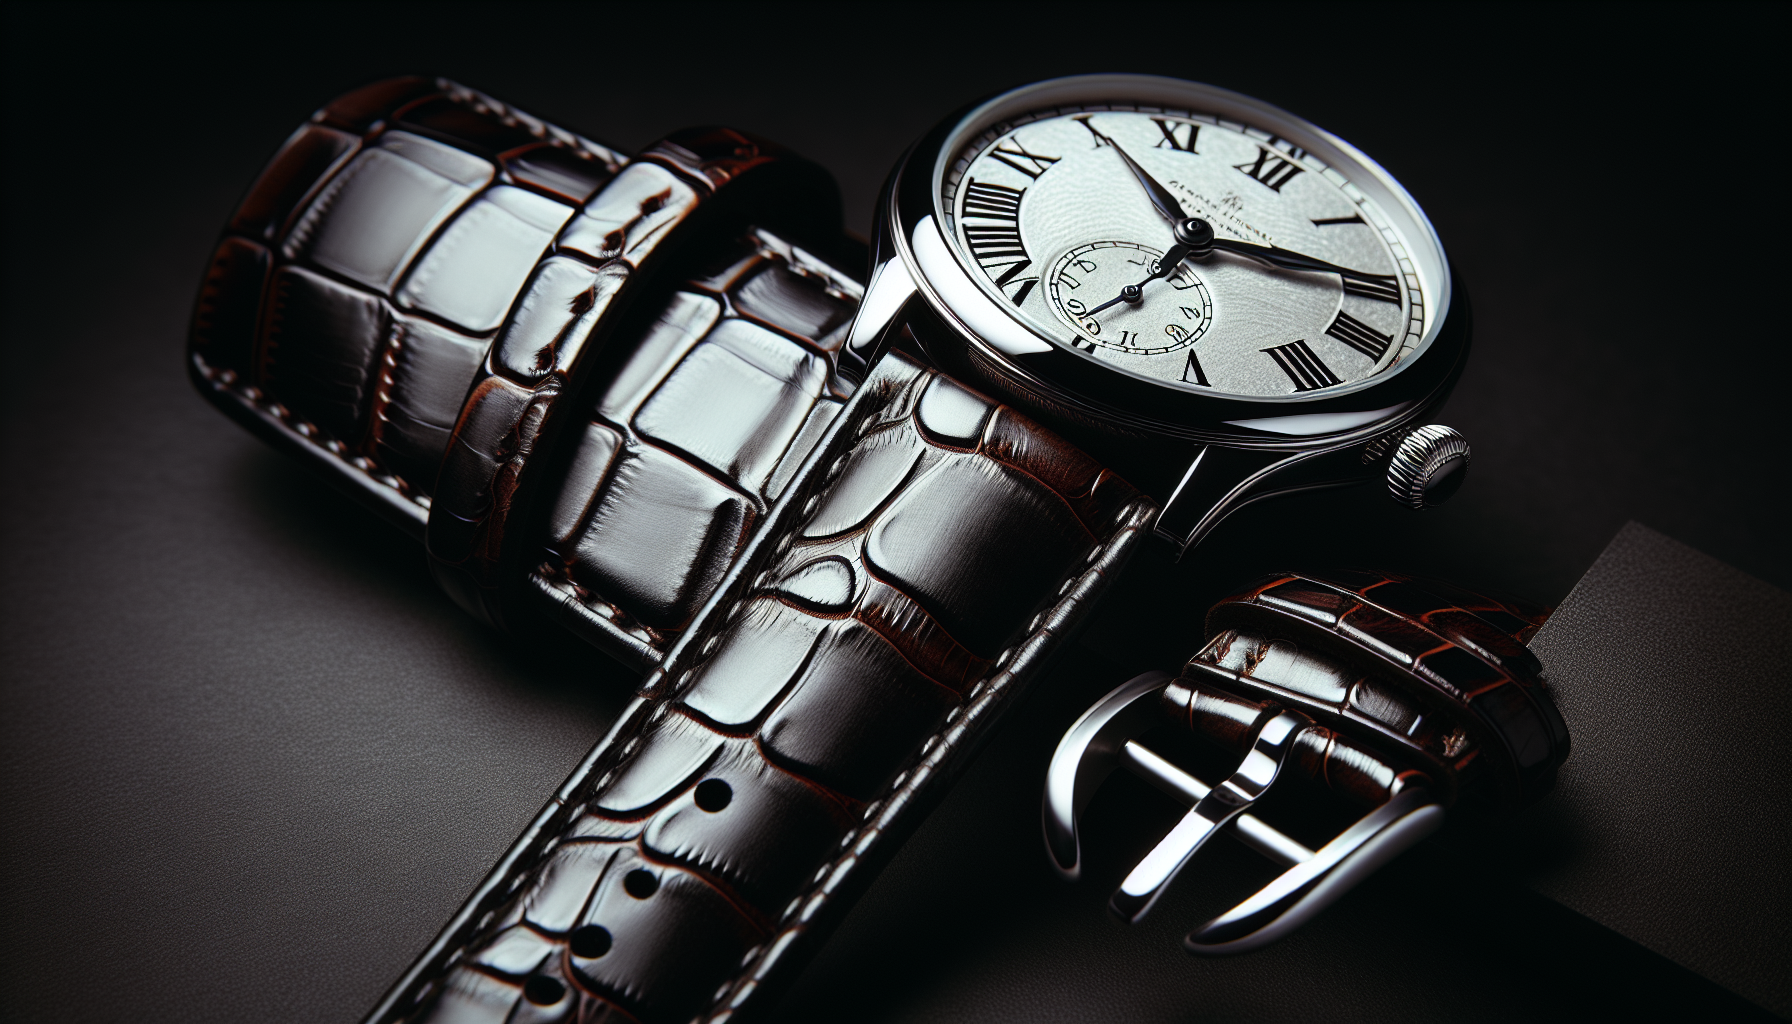 Elegant alligator watch strap paired with a classic timepiece